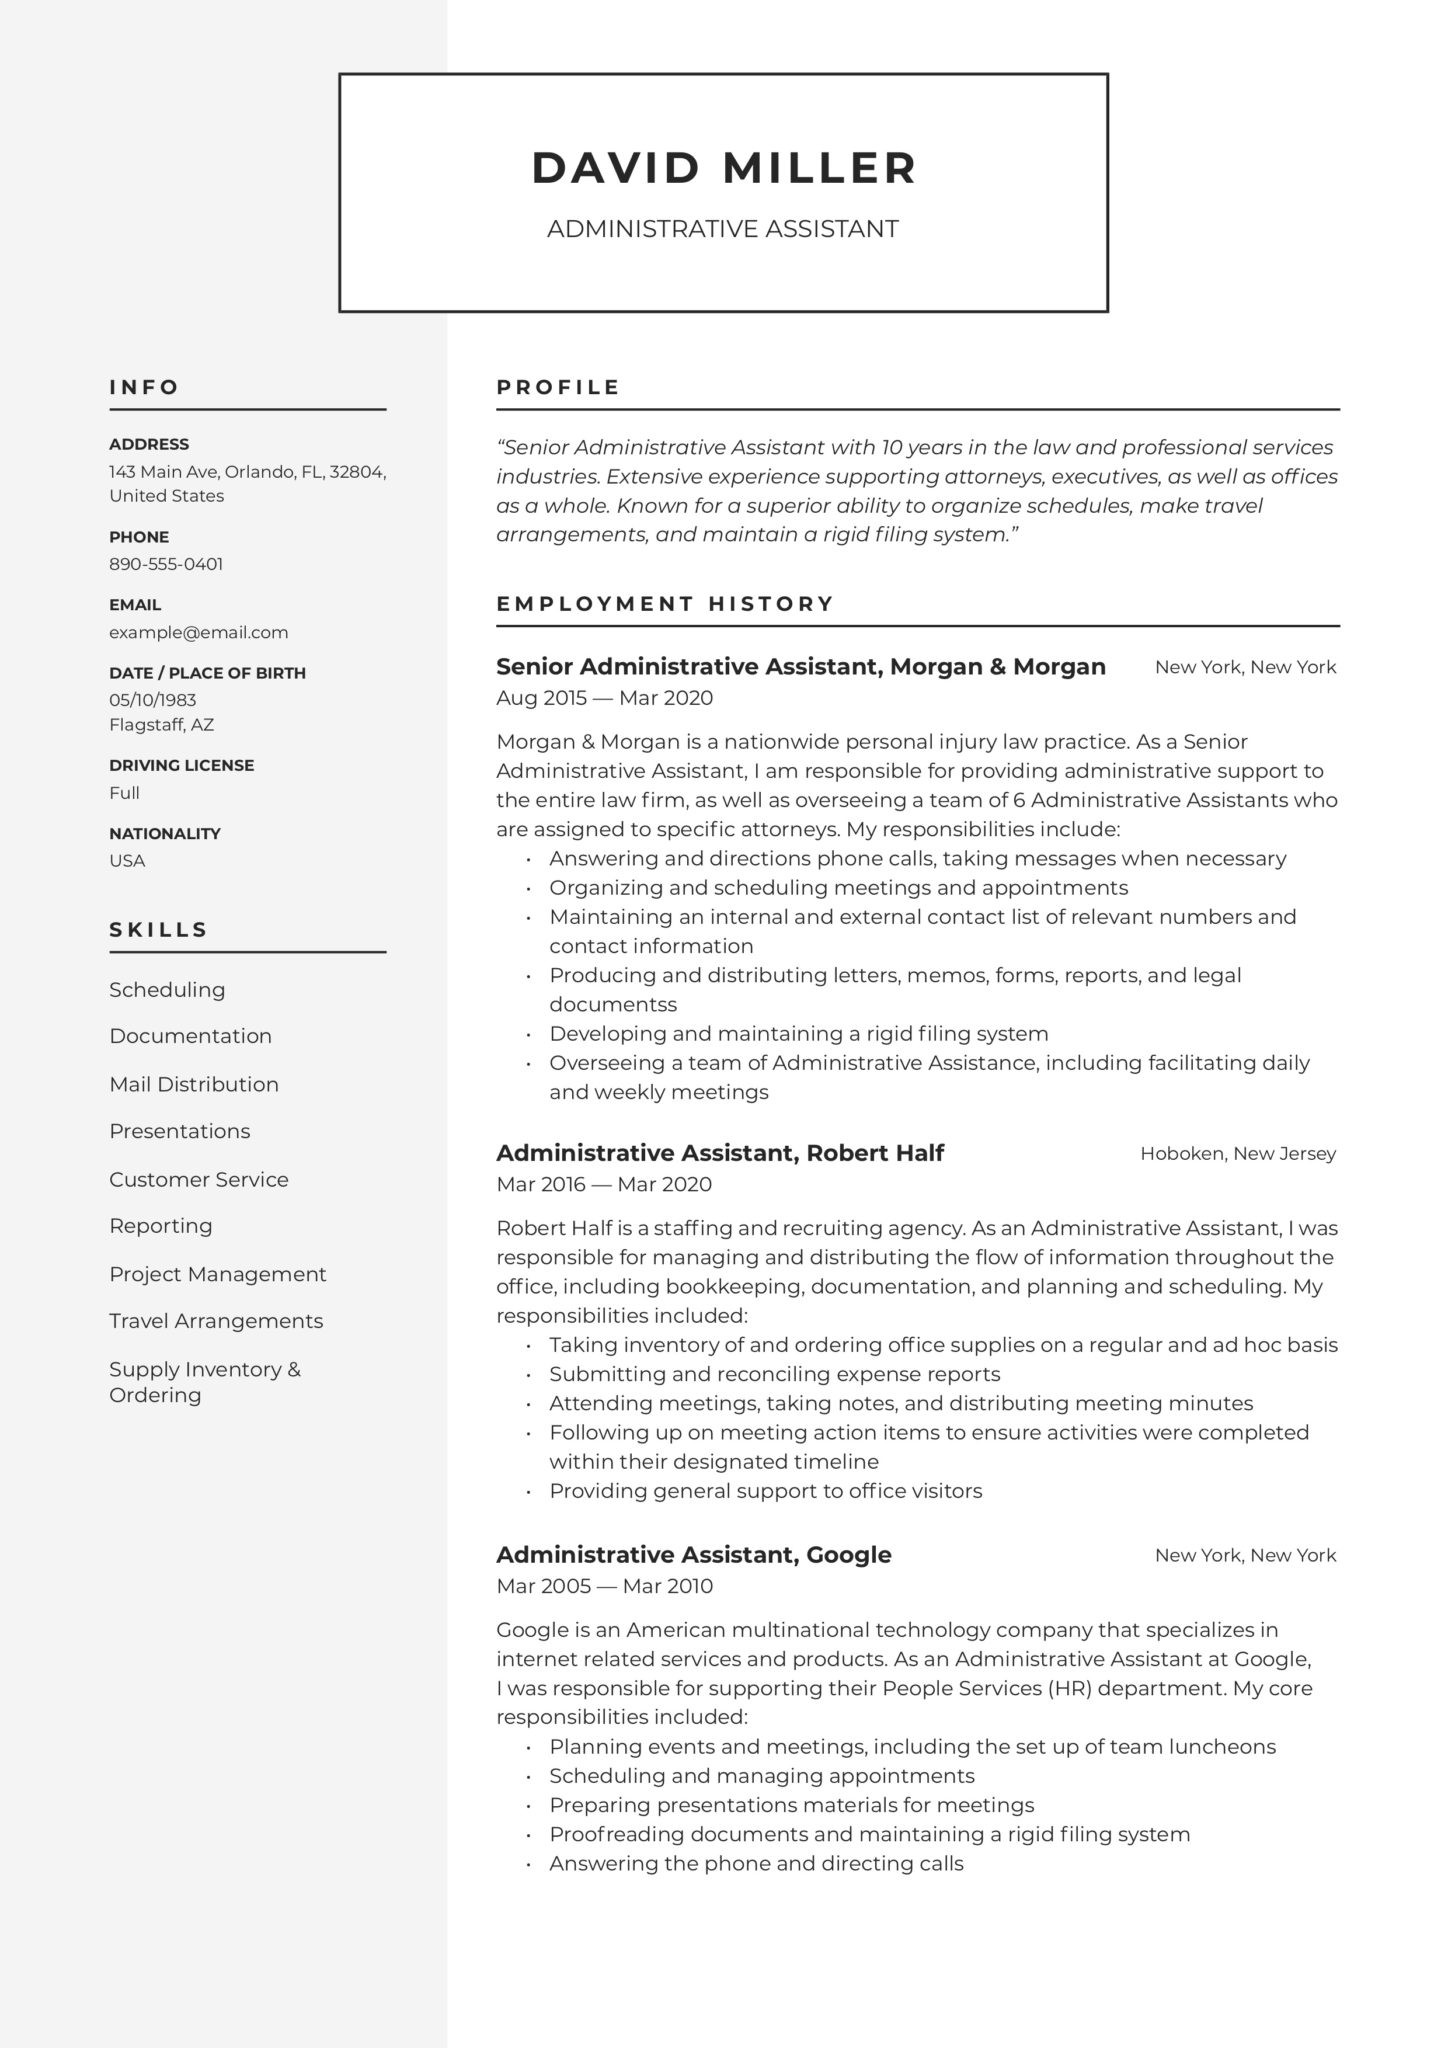 Sample Functional Resume for Administrative assistant 19 Free Administrative assistant Resumes & Writing Guide Pdf